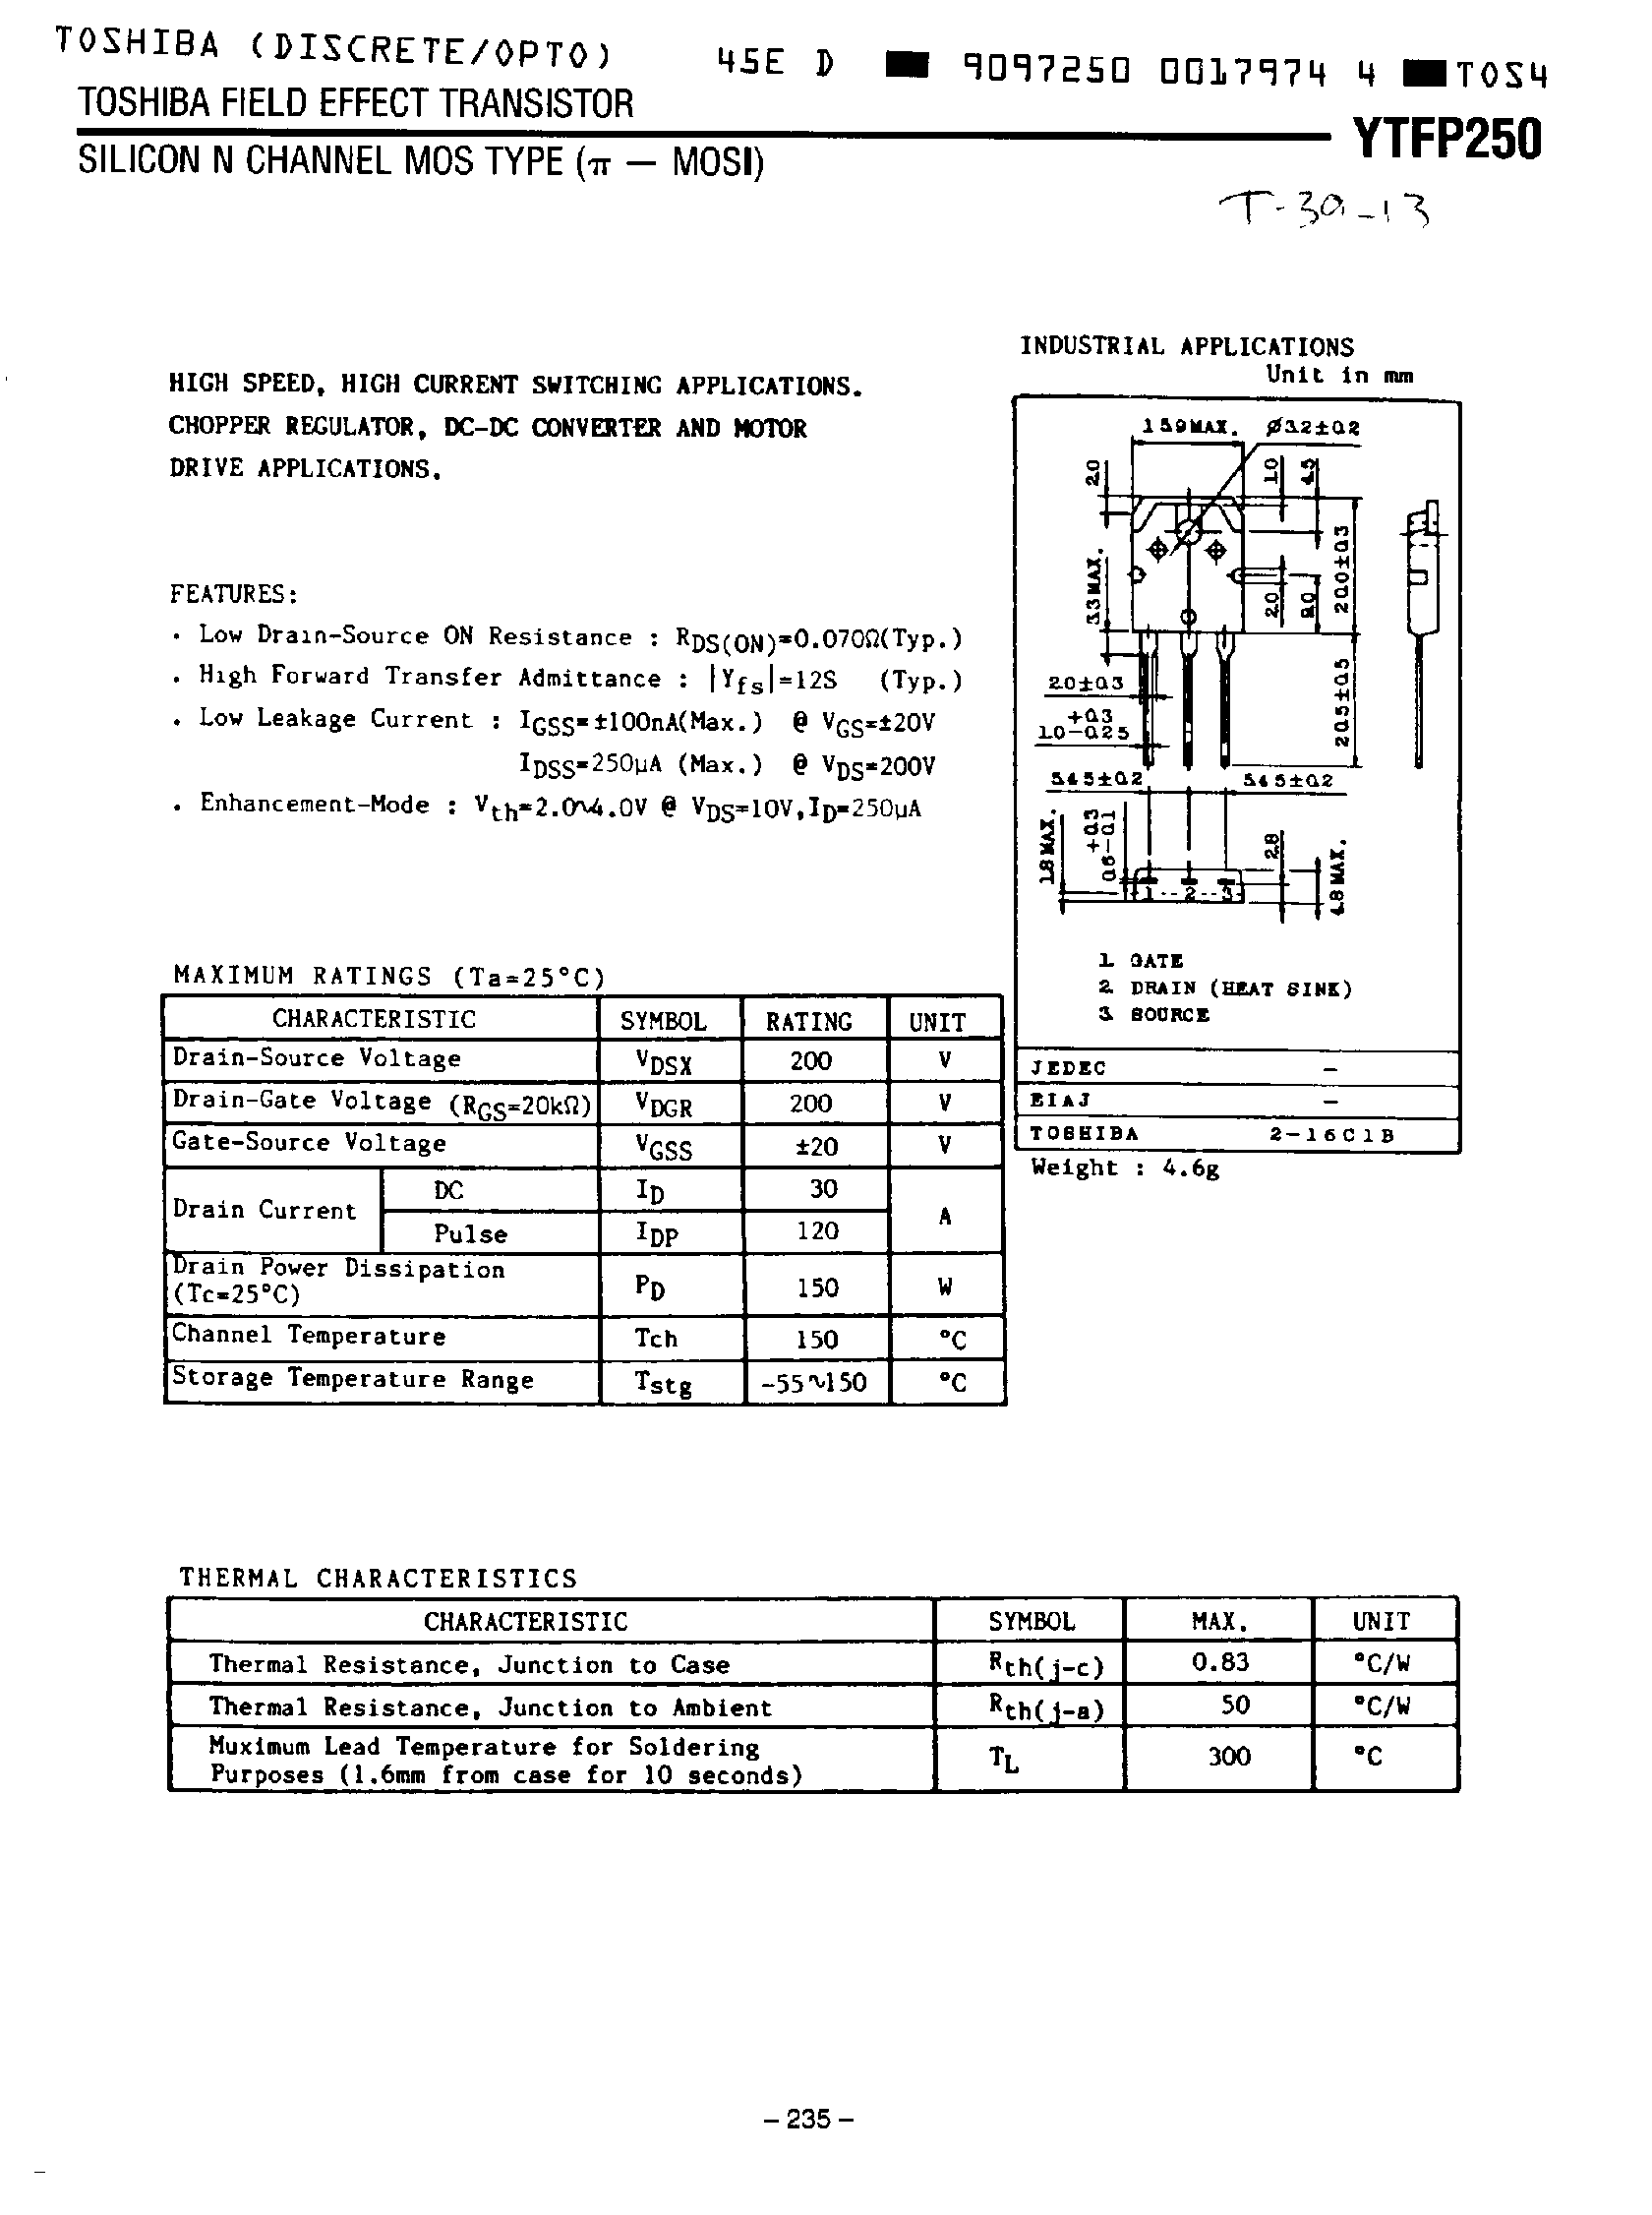 Datasheet YTFP250 - SILICON N CHANNEL MOS TYPE (PI - MOSI) page 1